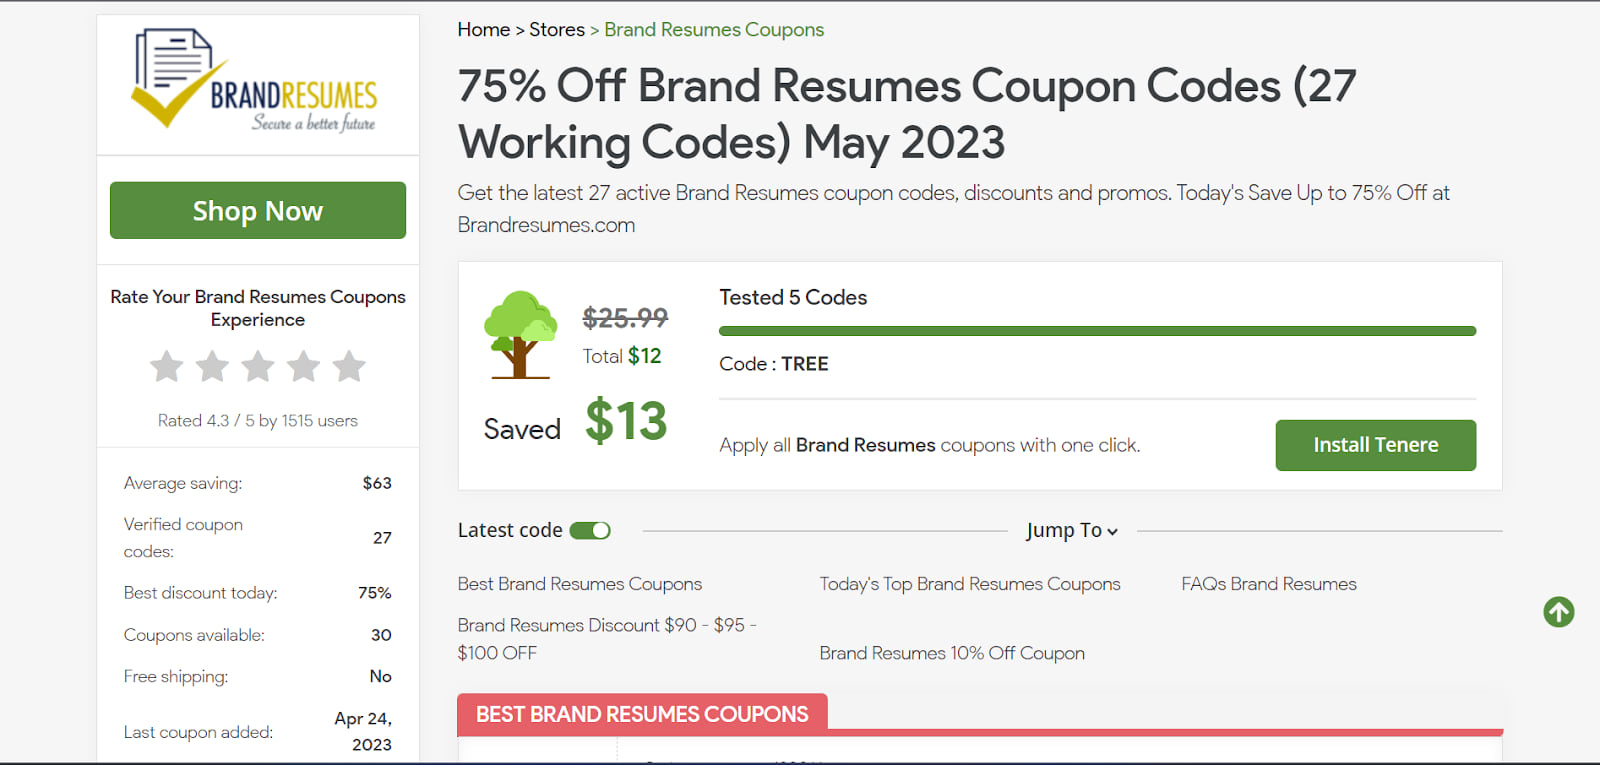 How To Use Brand Resumes Discount Code 3